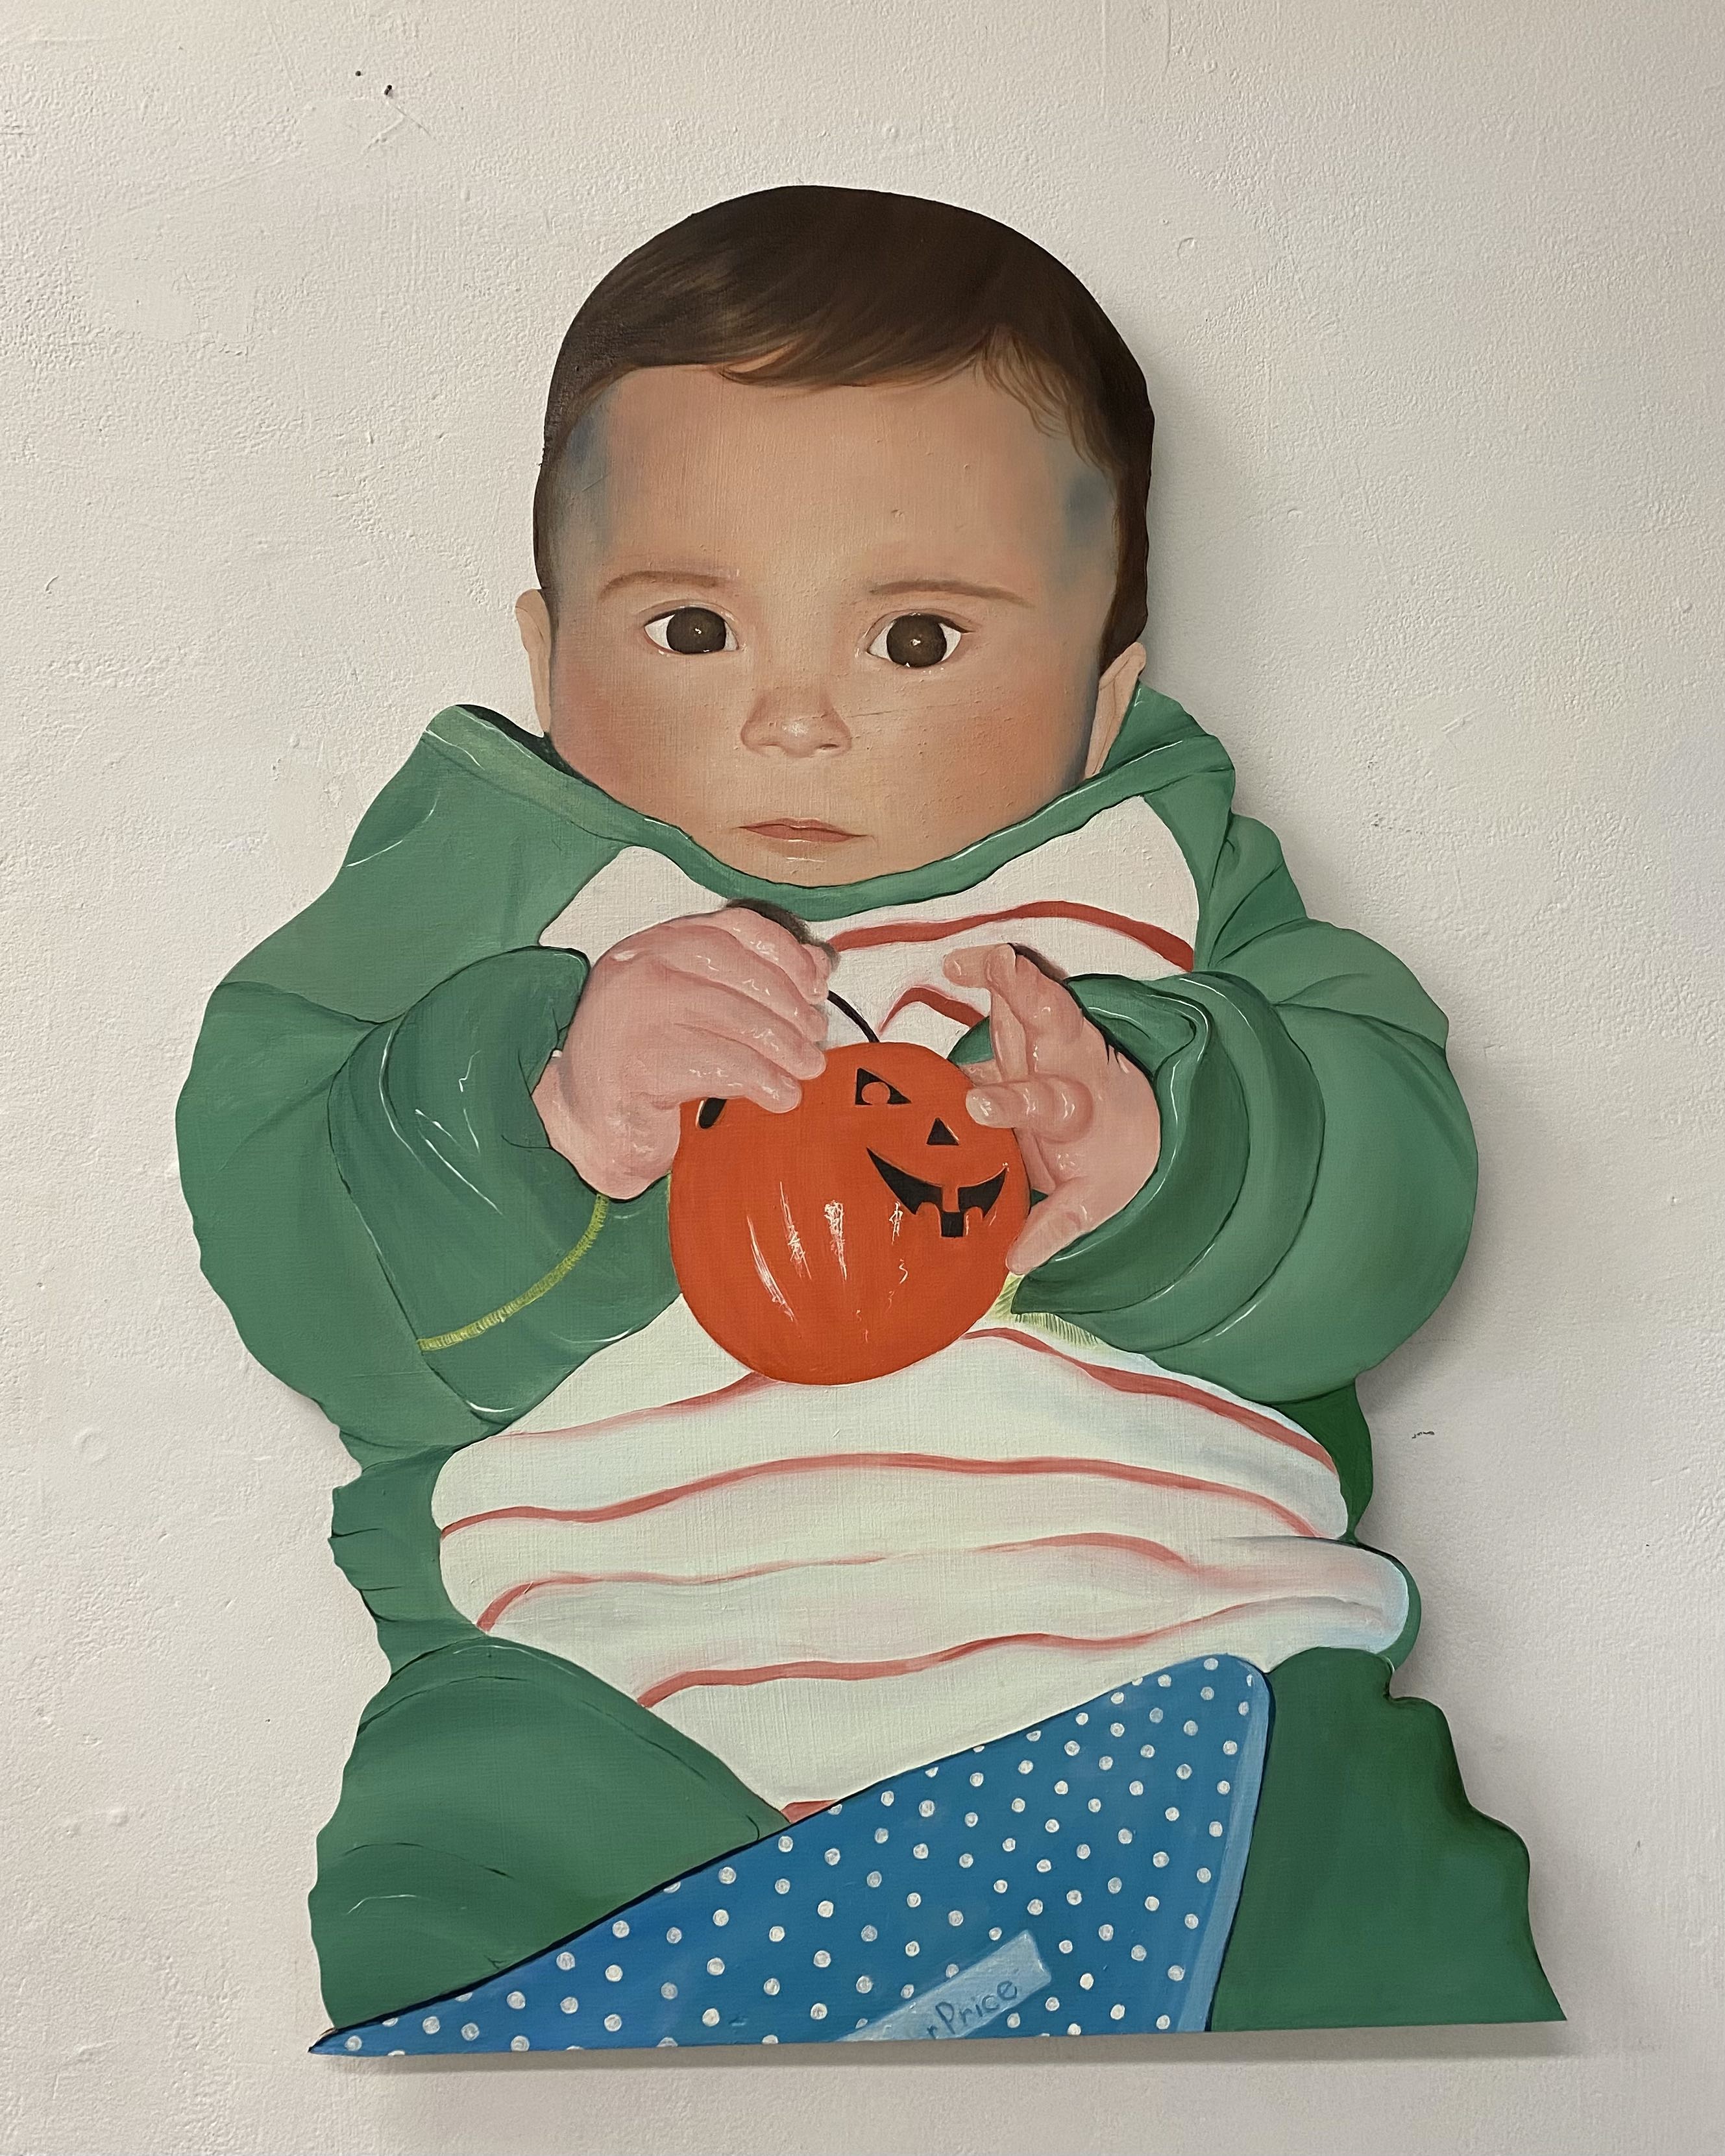 Too Young, 2023, Oil paint on Wood, 24” x 48”